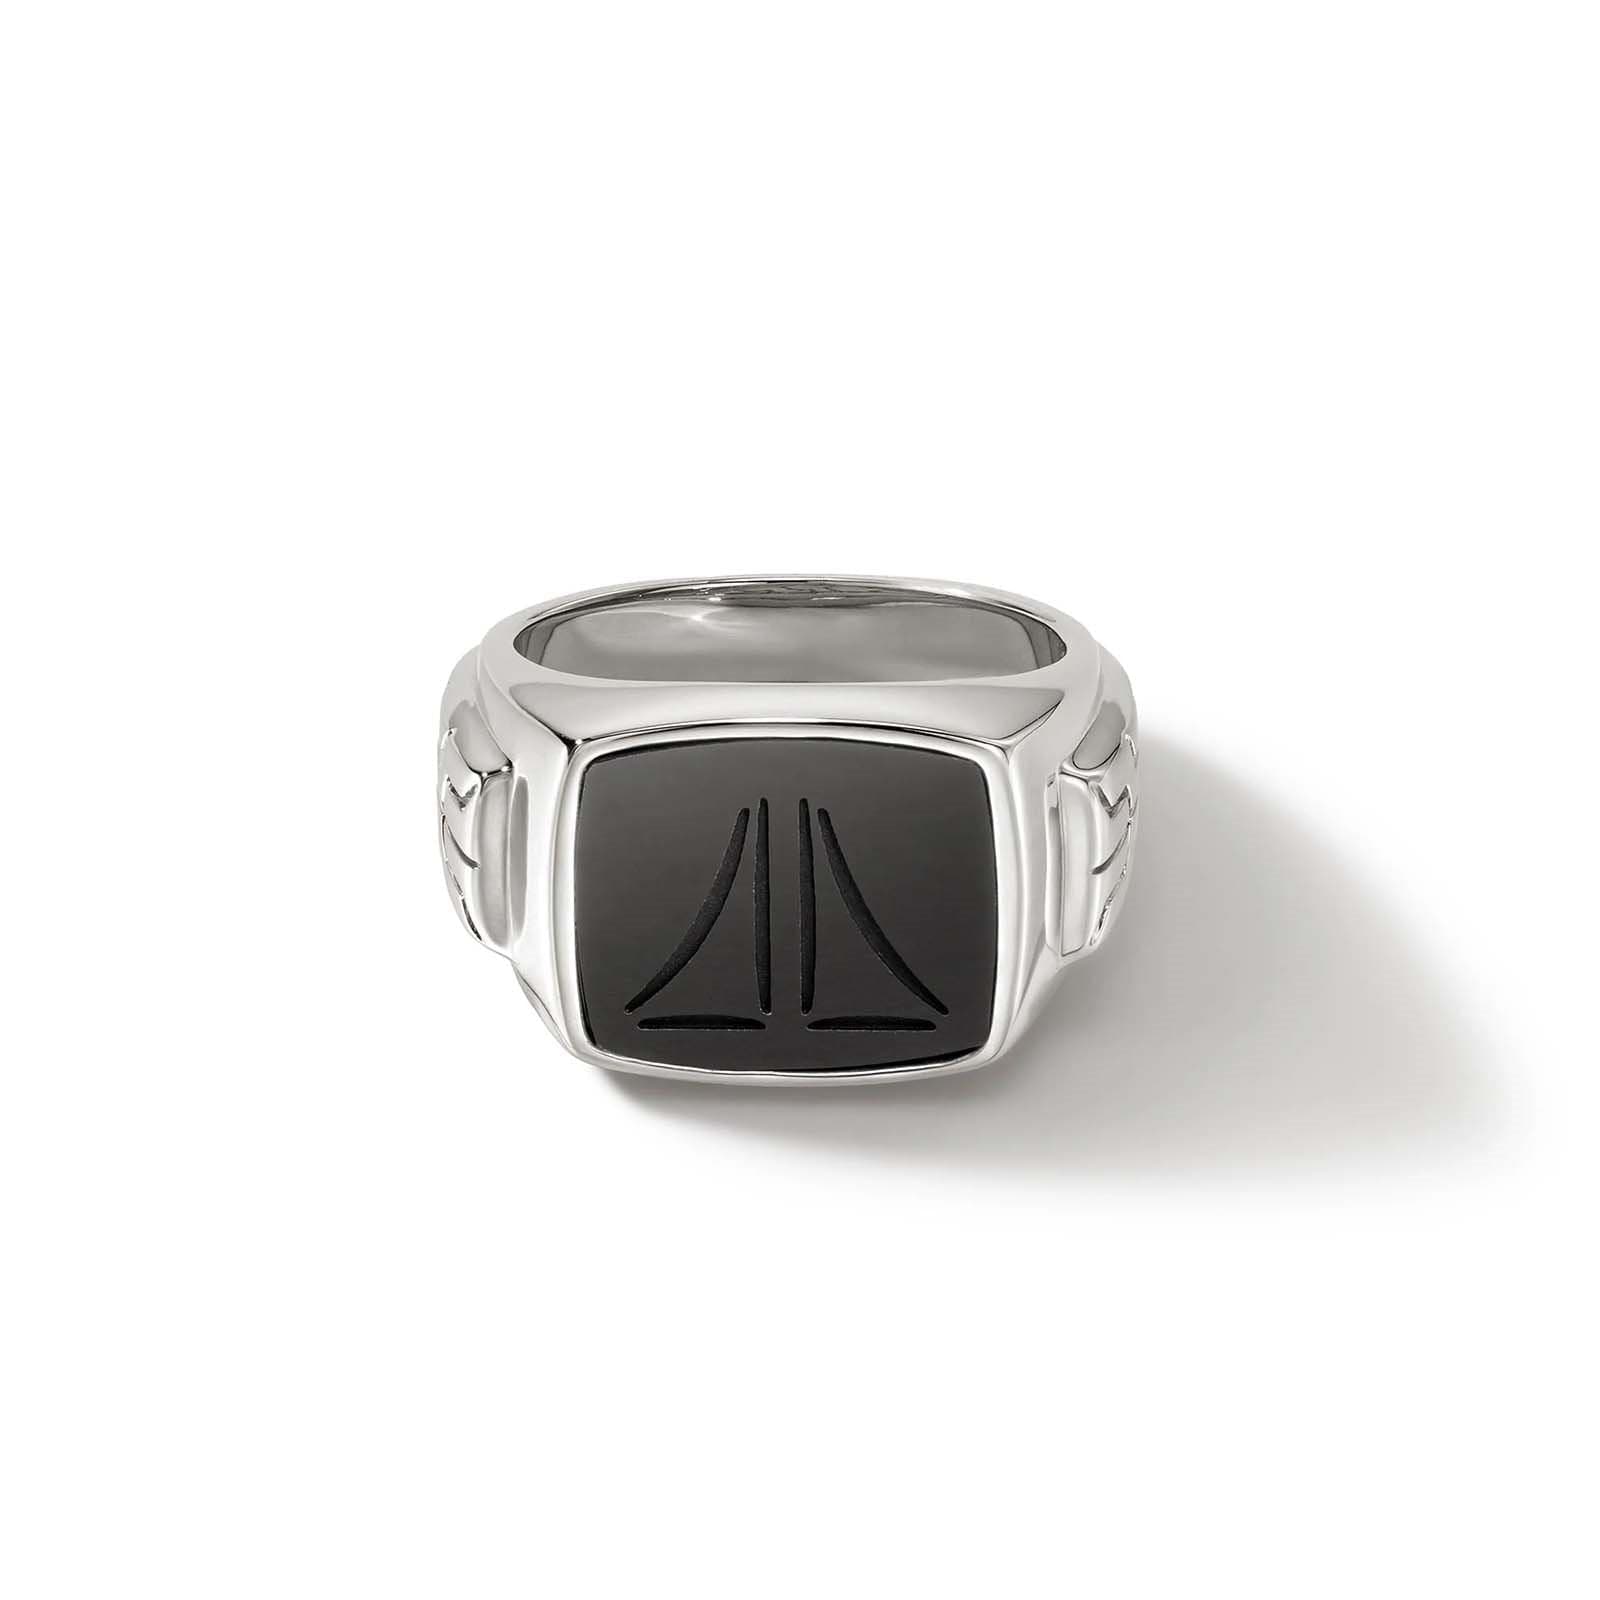 Anubis Full Stainless Steel Self Defense Ring – Cakra EDC Gadgets